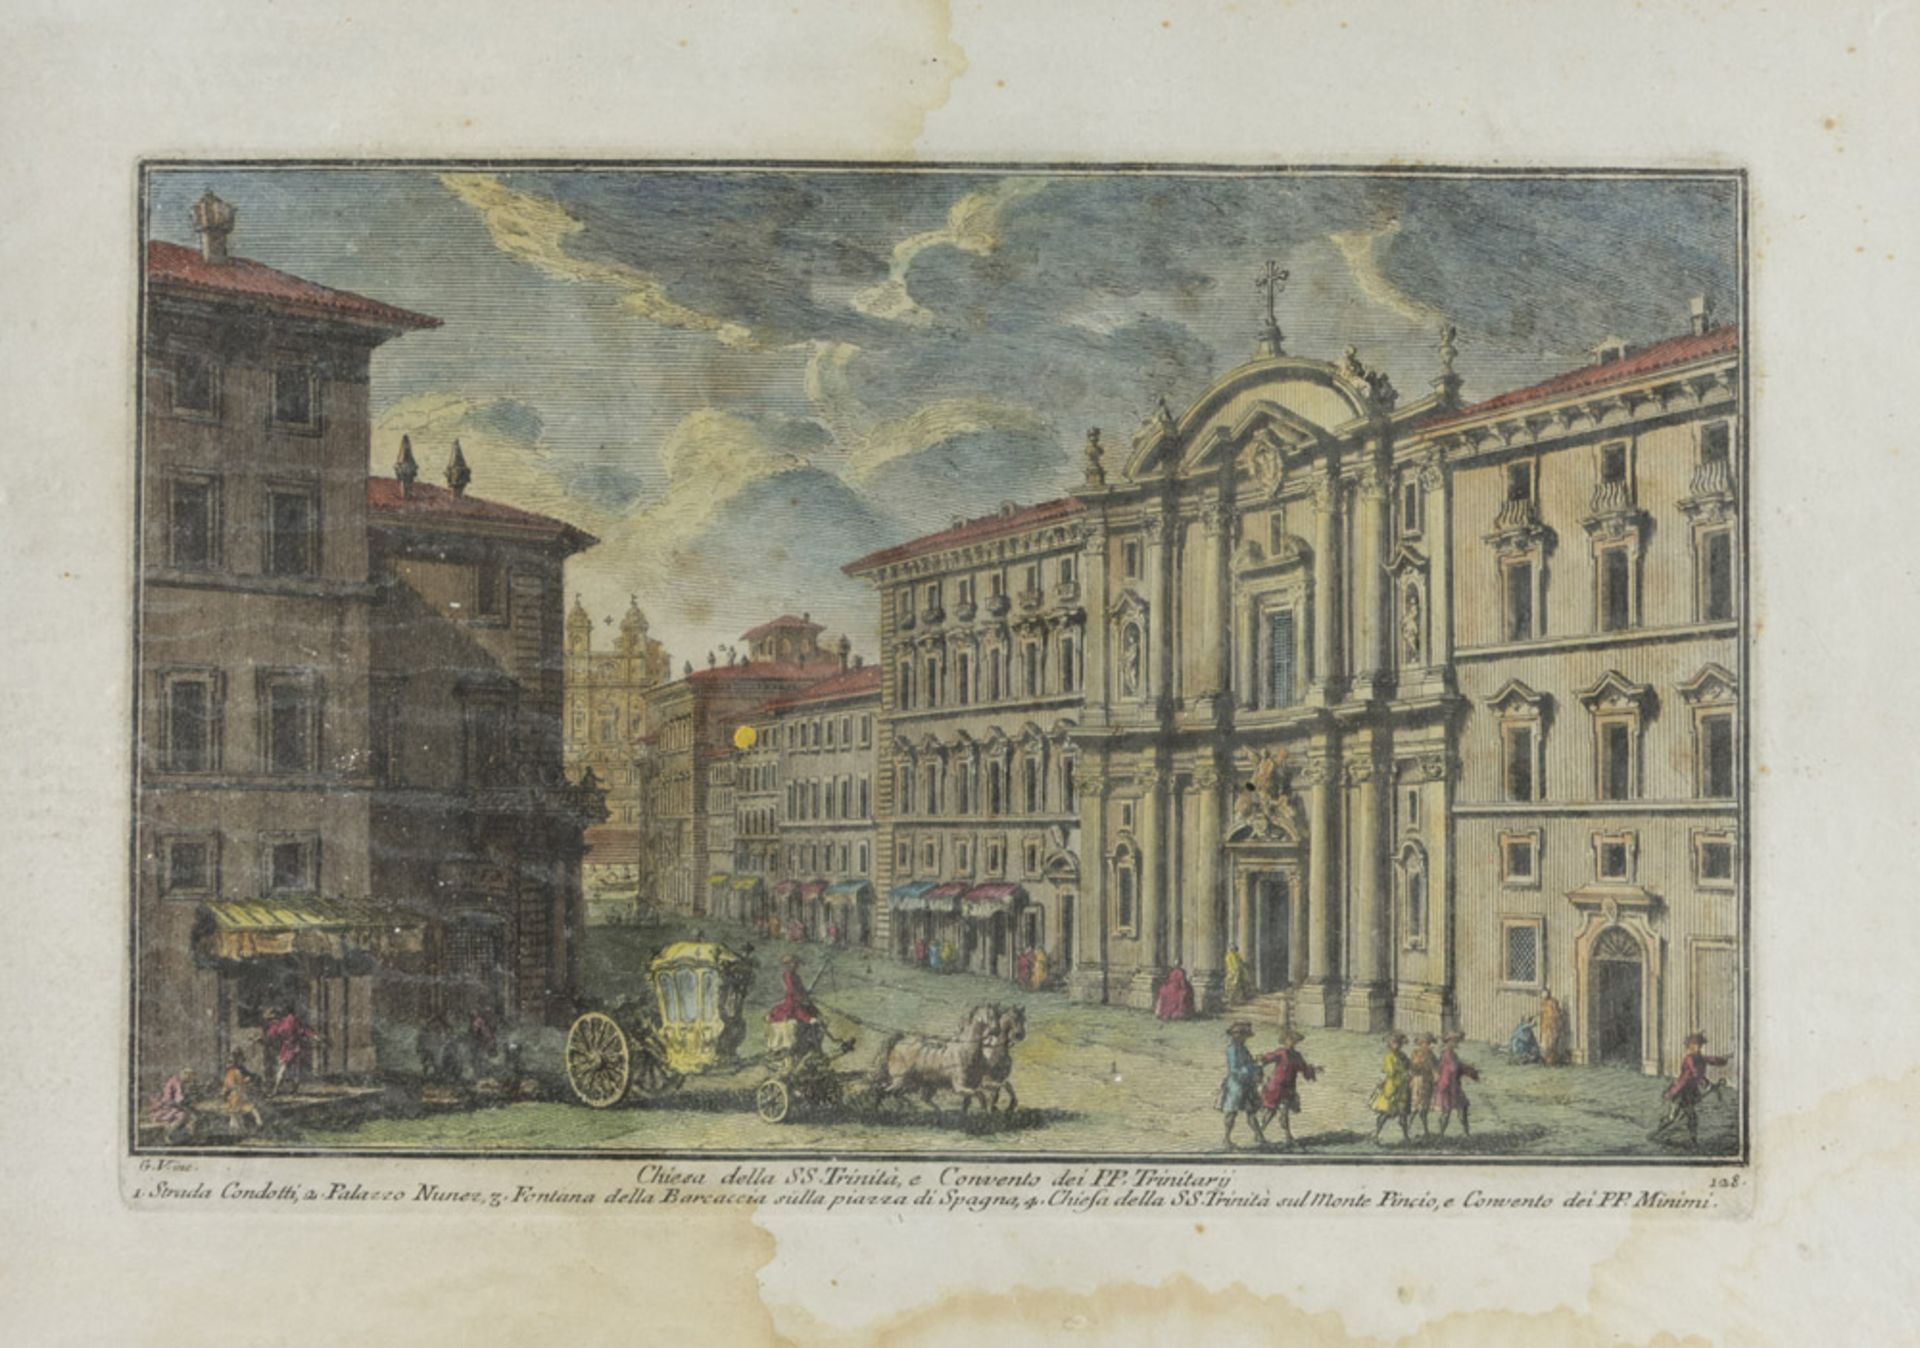 ENGRAVER XIX Church of the S.S. Trinit… and Convent of the Ps.P. Trinitarj, from Vases Church of